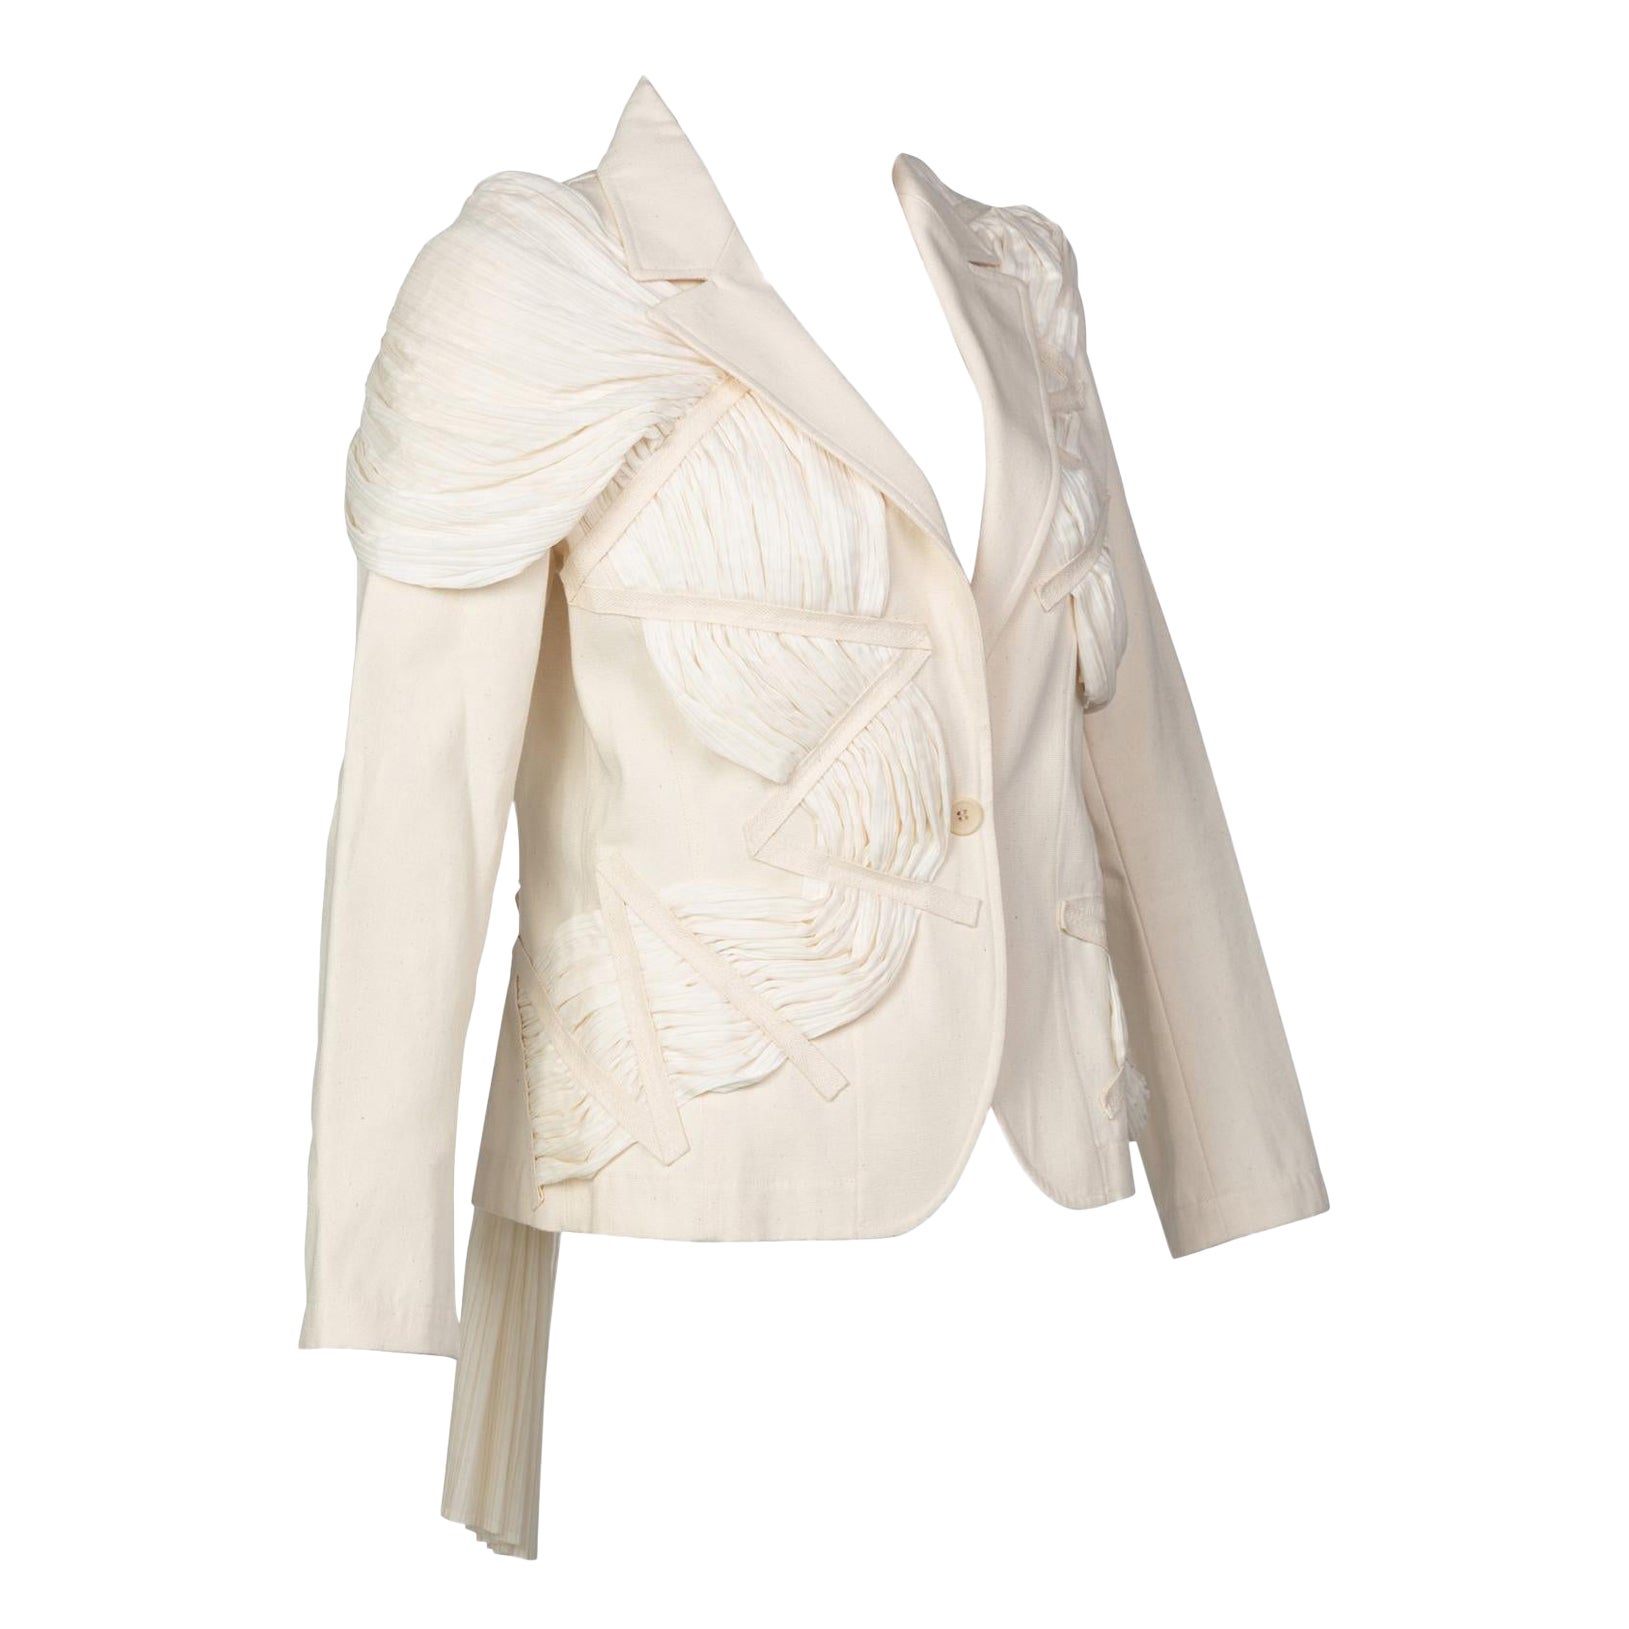 Issey Miyake S/S 2003 Runway Cream Cotton Canvas Jacket Museum Piece For Sale